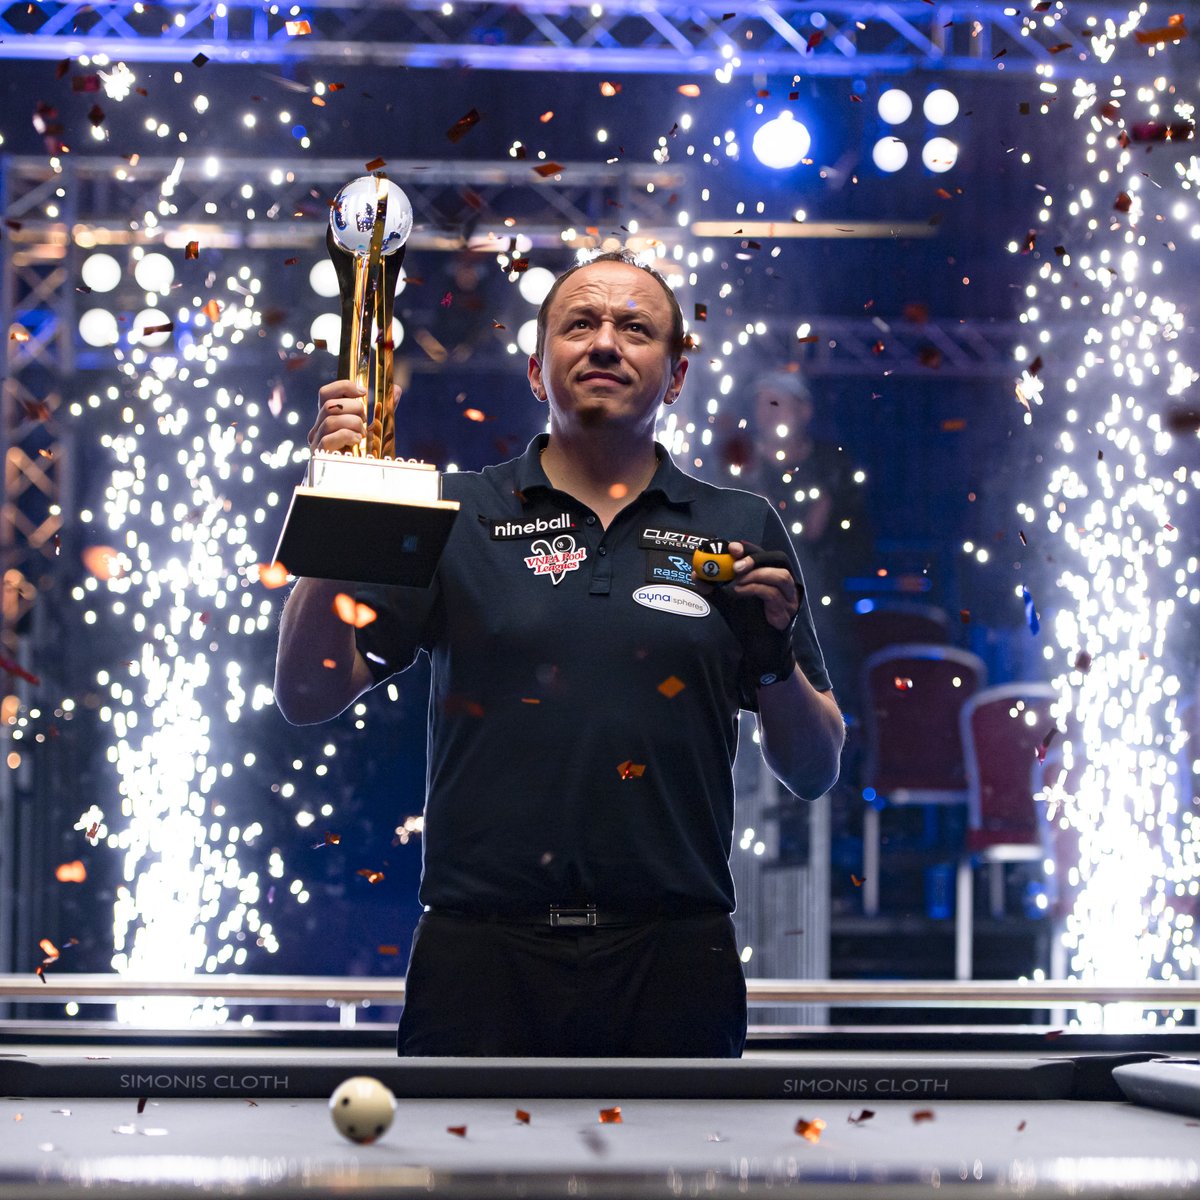 🇺🇸 Five-time US Open champion
🌟 Three-time Mosconi Cup champion
🏆 World Pool Champion

Game changer. History maker. The greatest of a generation. 

Congratulations to Shane Van Boening, the latest addition to the BCA Hall of Fame 👏